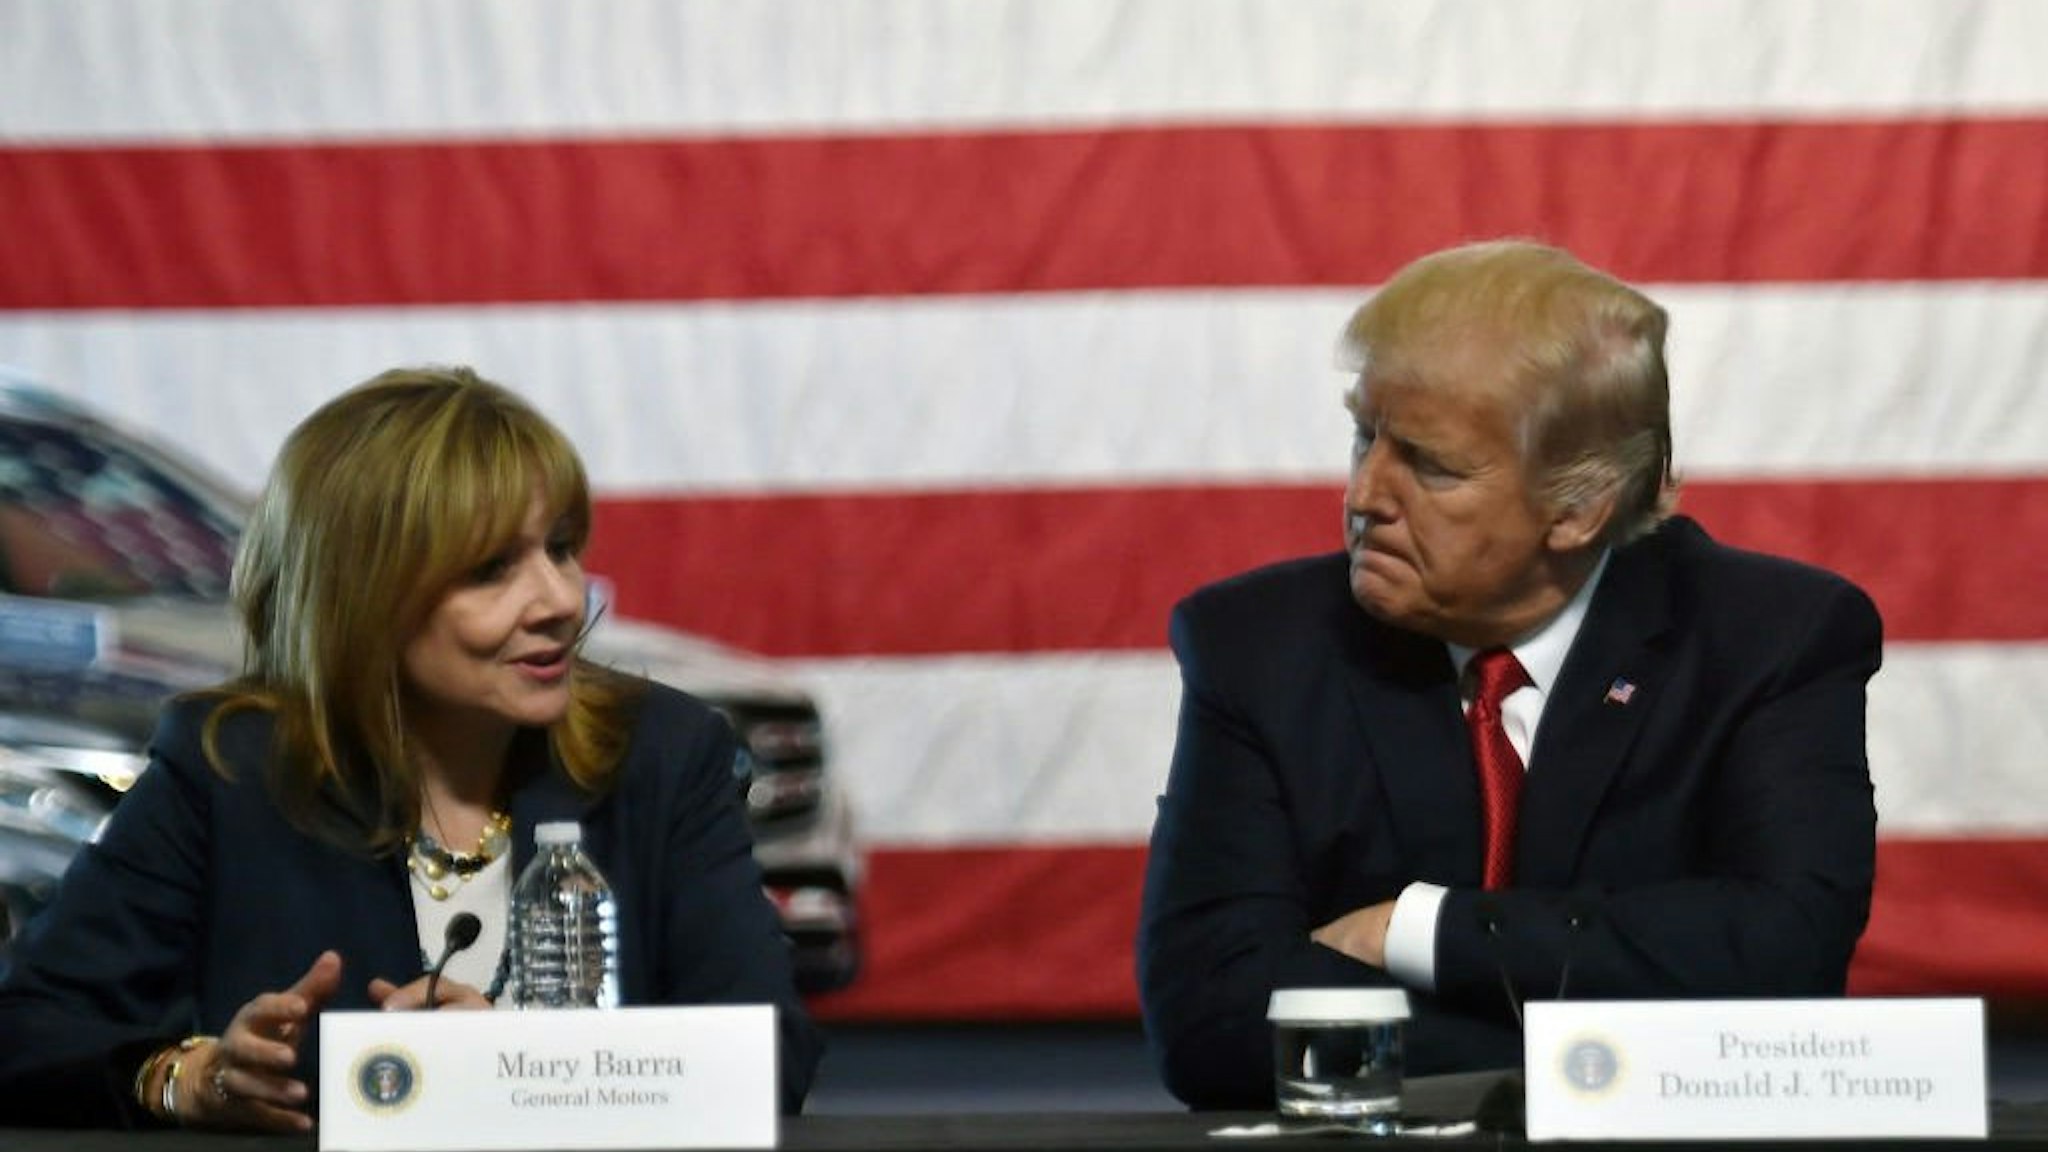 US President Donald Trump speaks at American Center for Mobility in Ypsilanti, Michigan with General Motors CEO Mary Barra on March 15, 2017.